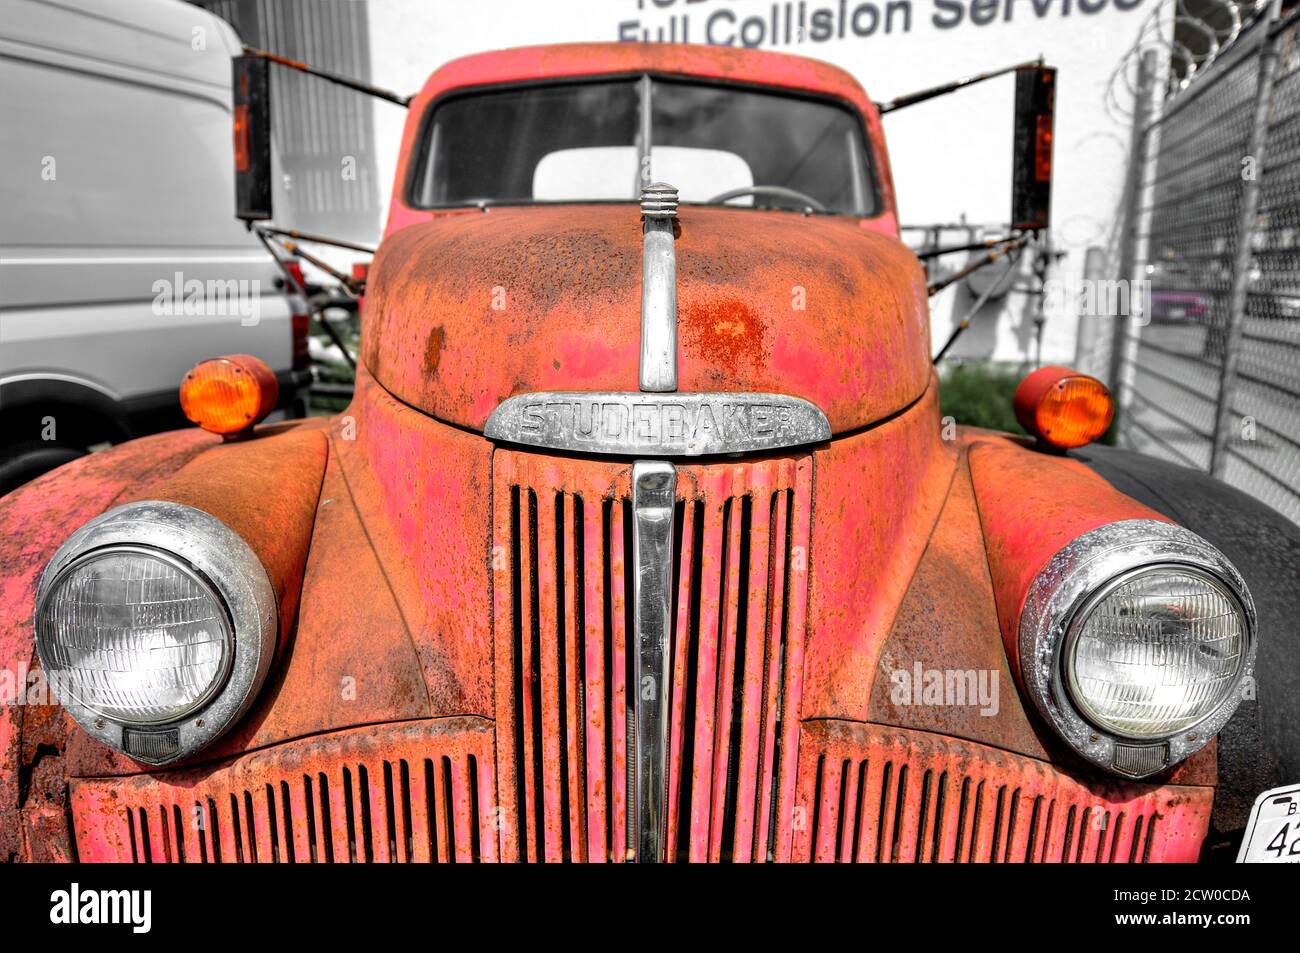 Front view of an old red colored rusty Studebaker truck parked along a road in Vancouver City, British Columbia, Canada Stock Photo